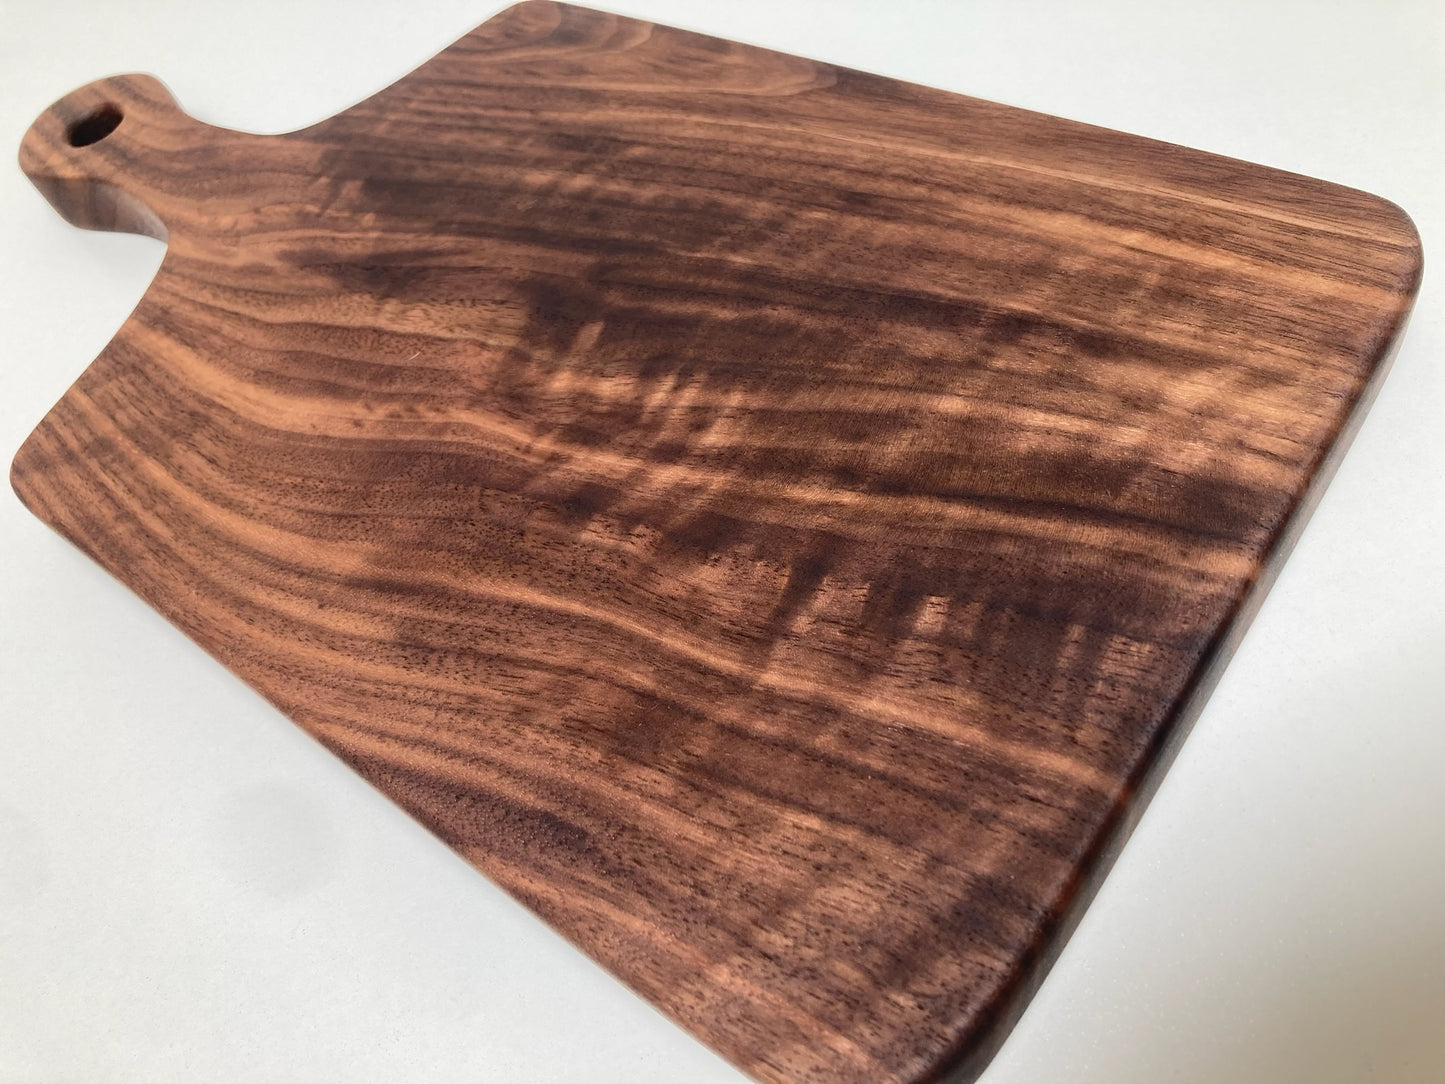 Small Solid Walnut Board with Handle (23SH01)